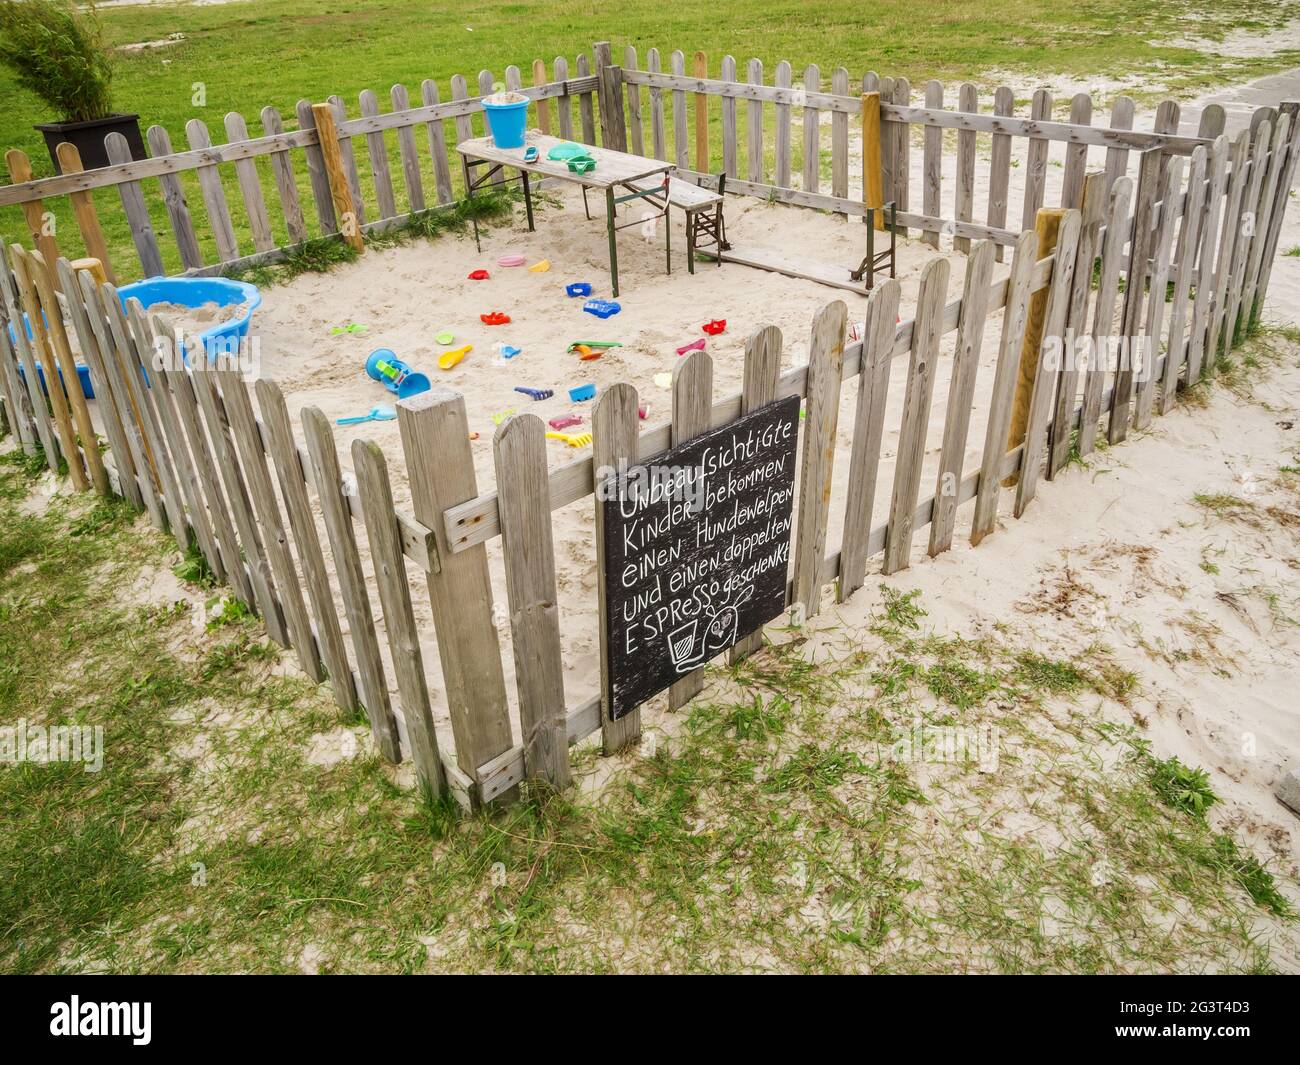 Fenced sandpit with toys Stock Photo